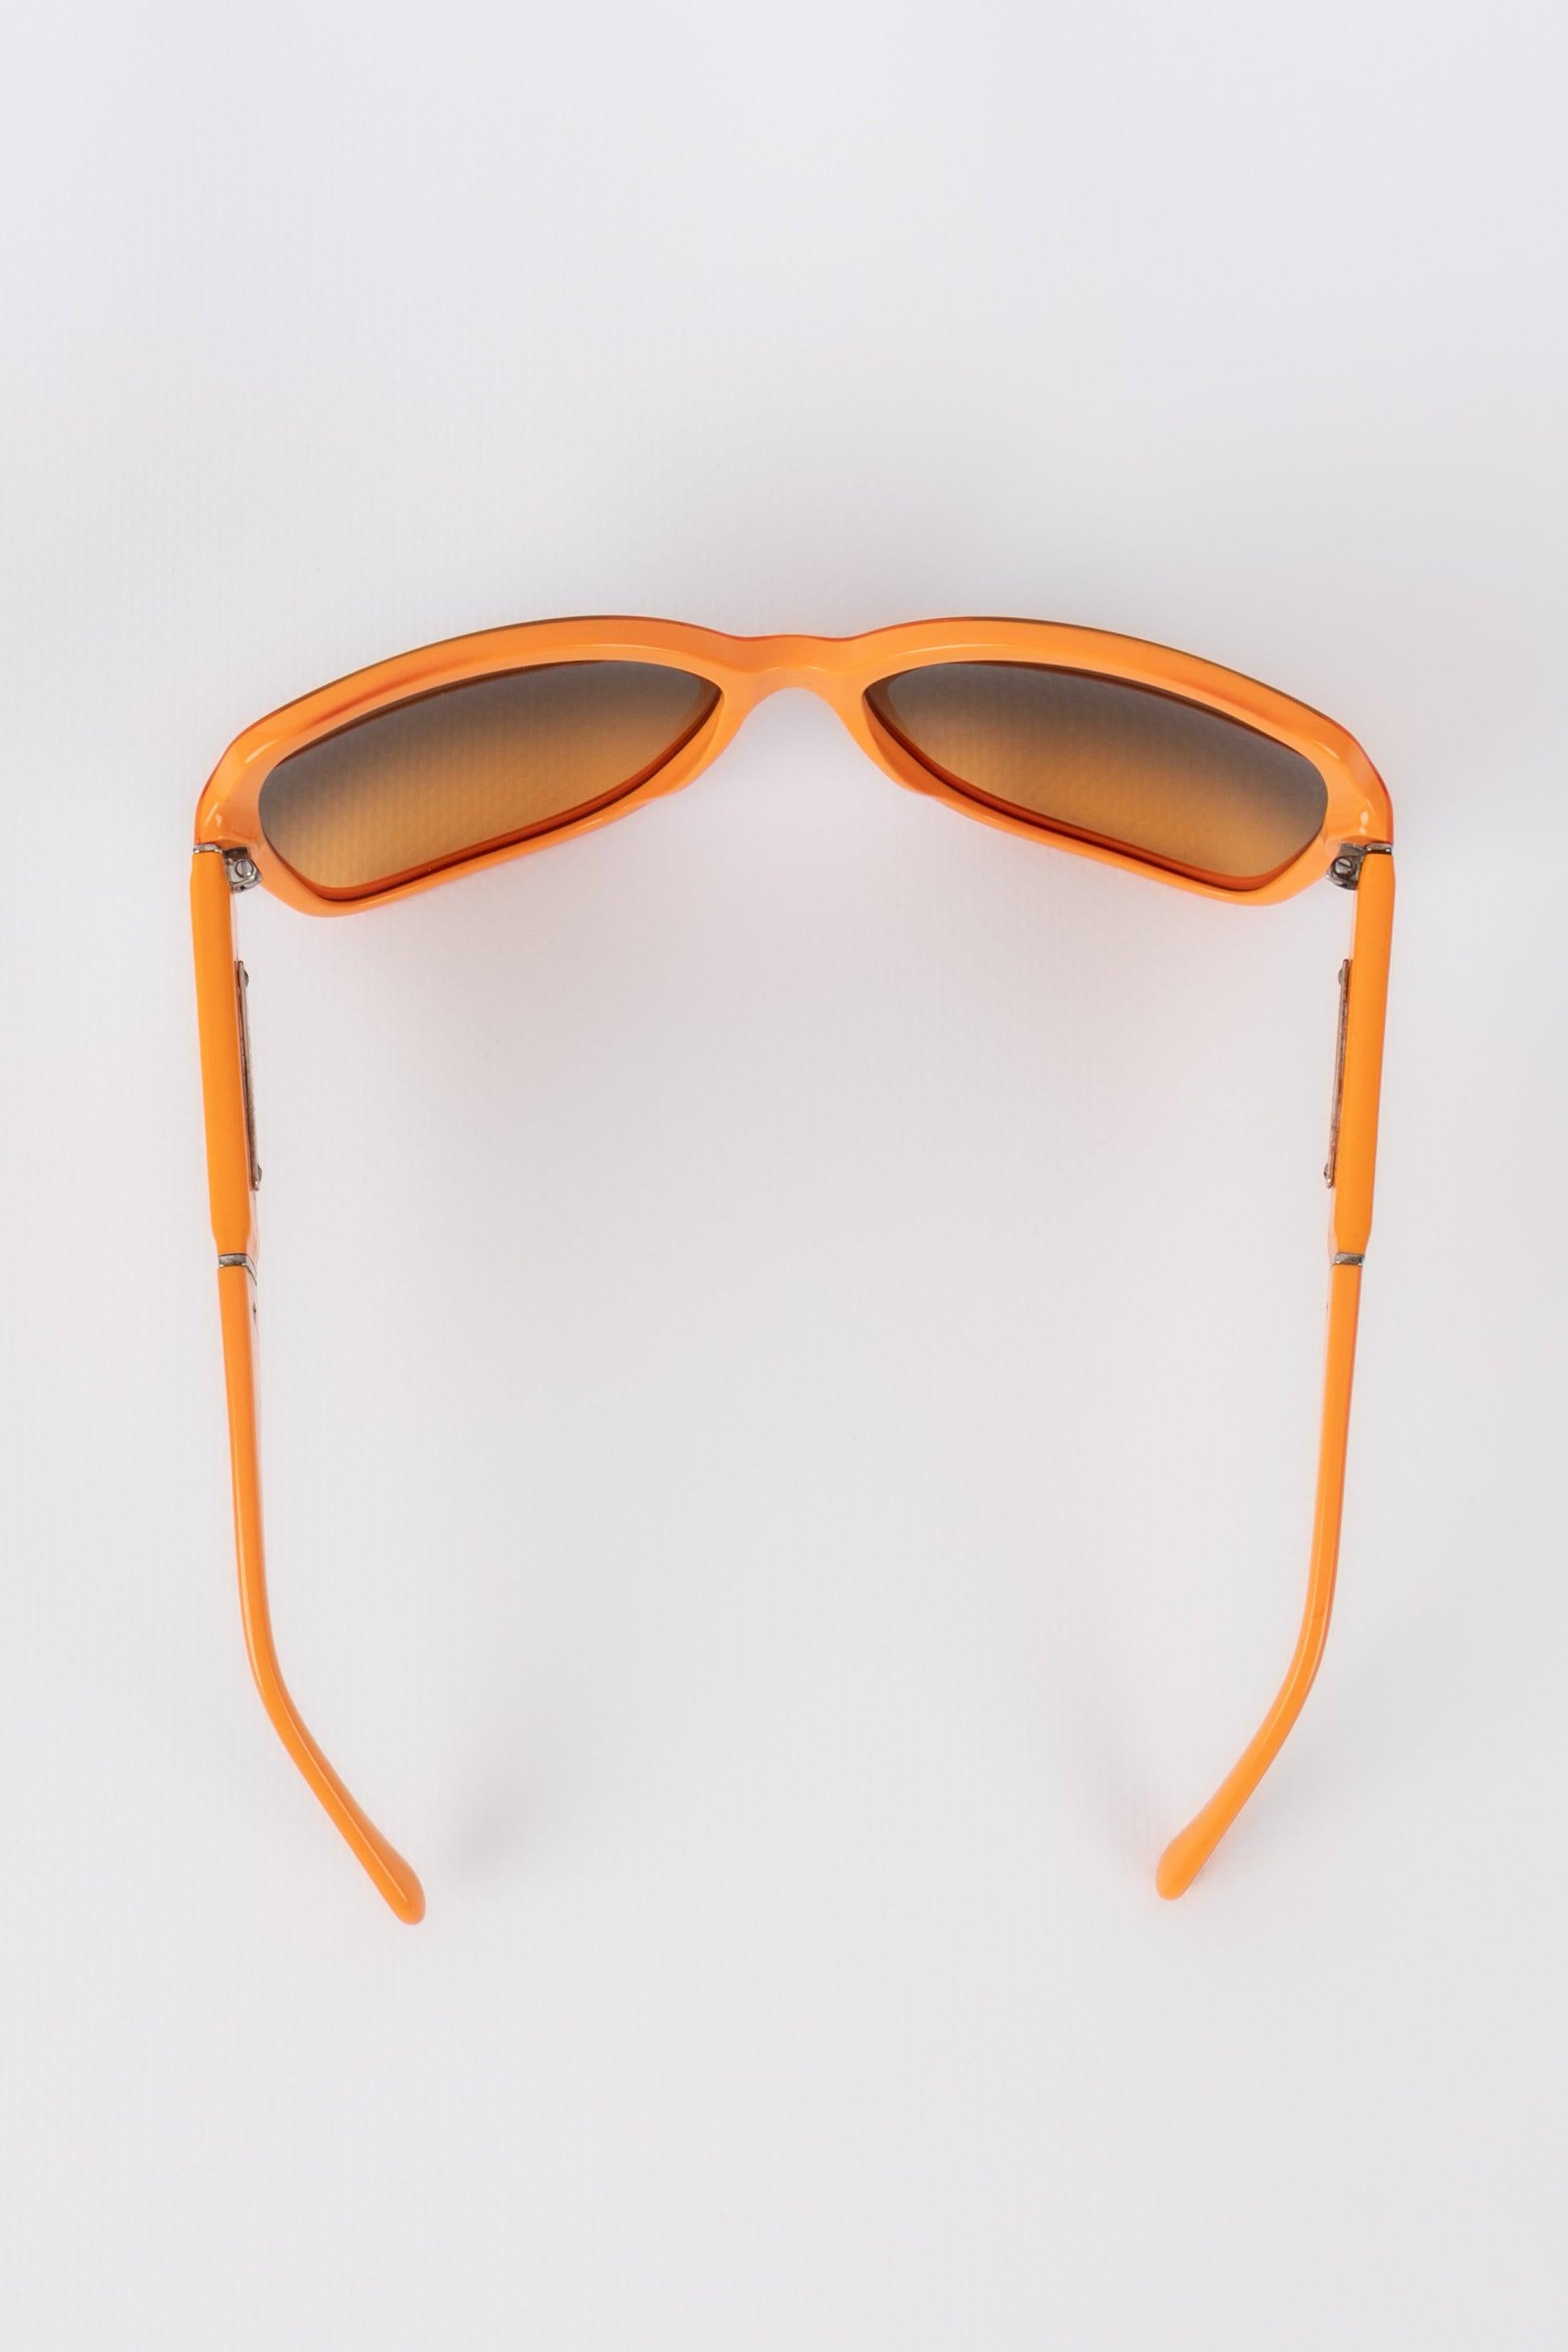 Chanel Orange Sunglasses with CC Logos For Sale 2